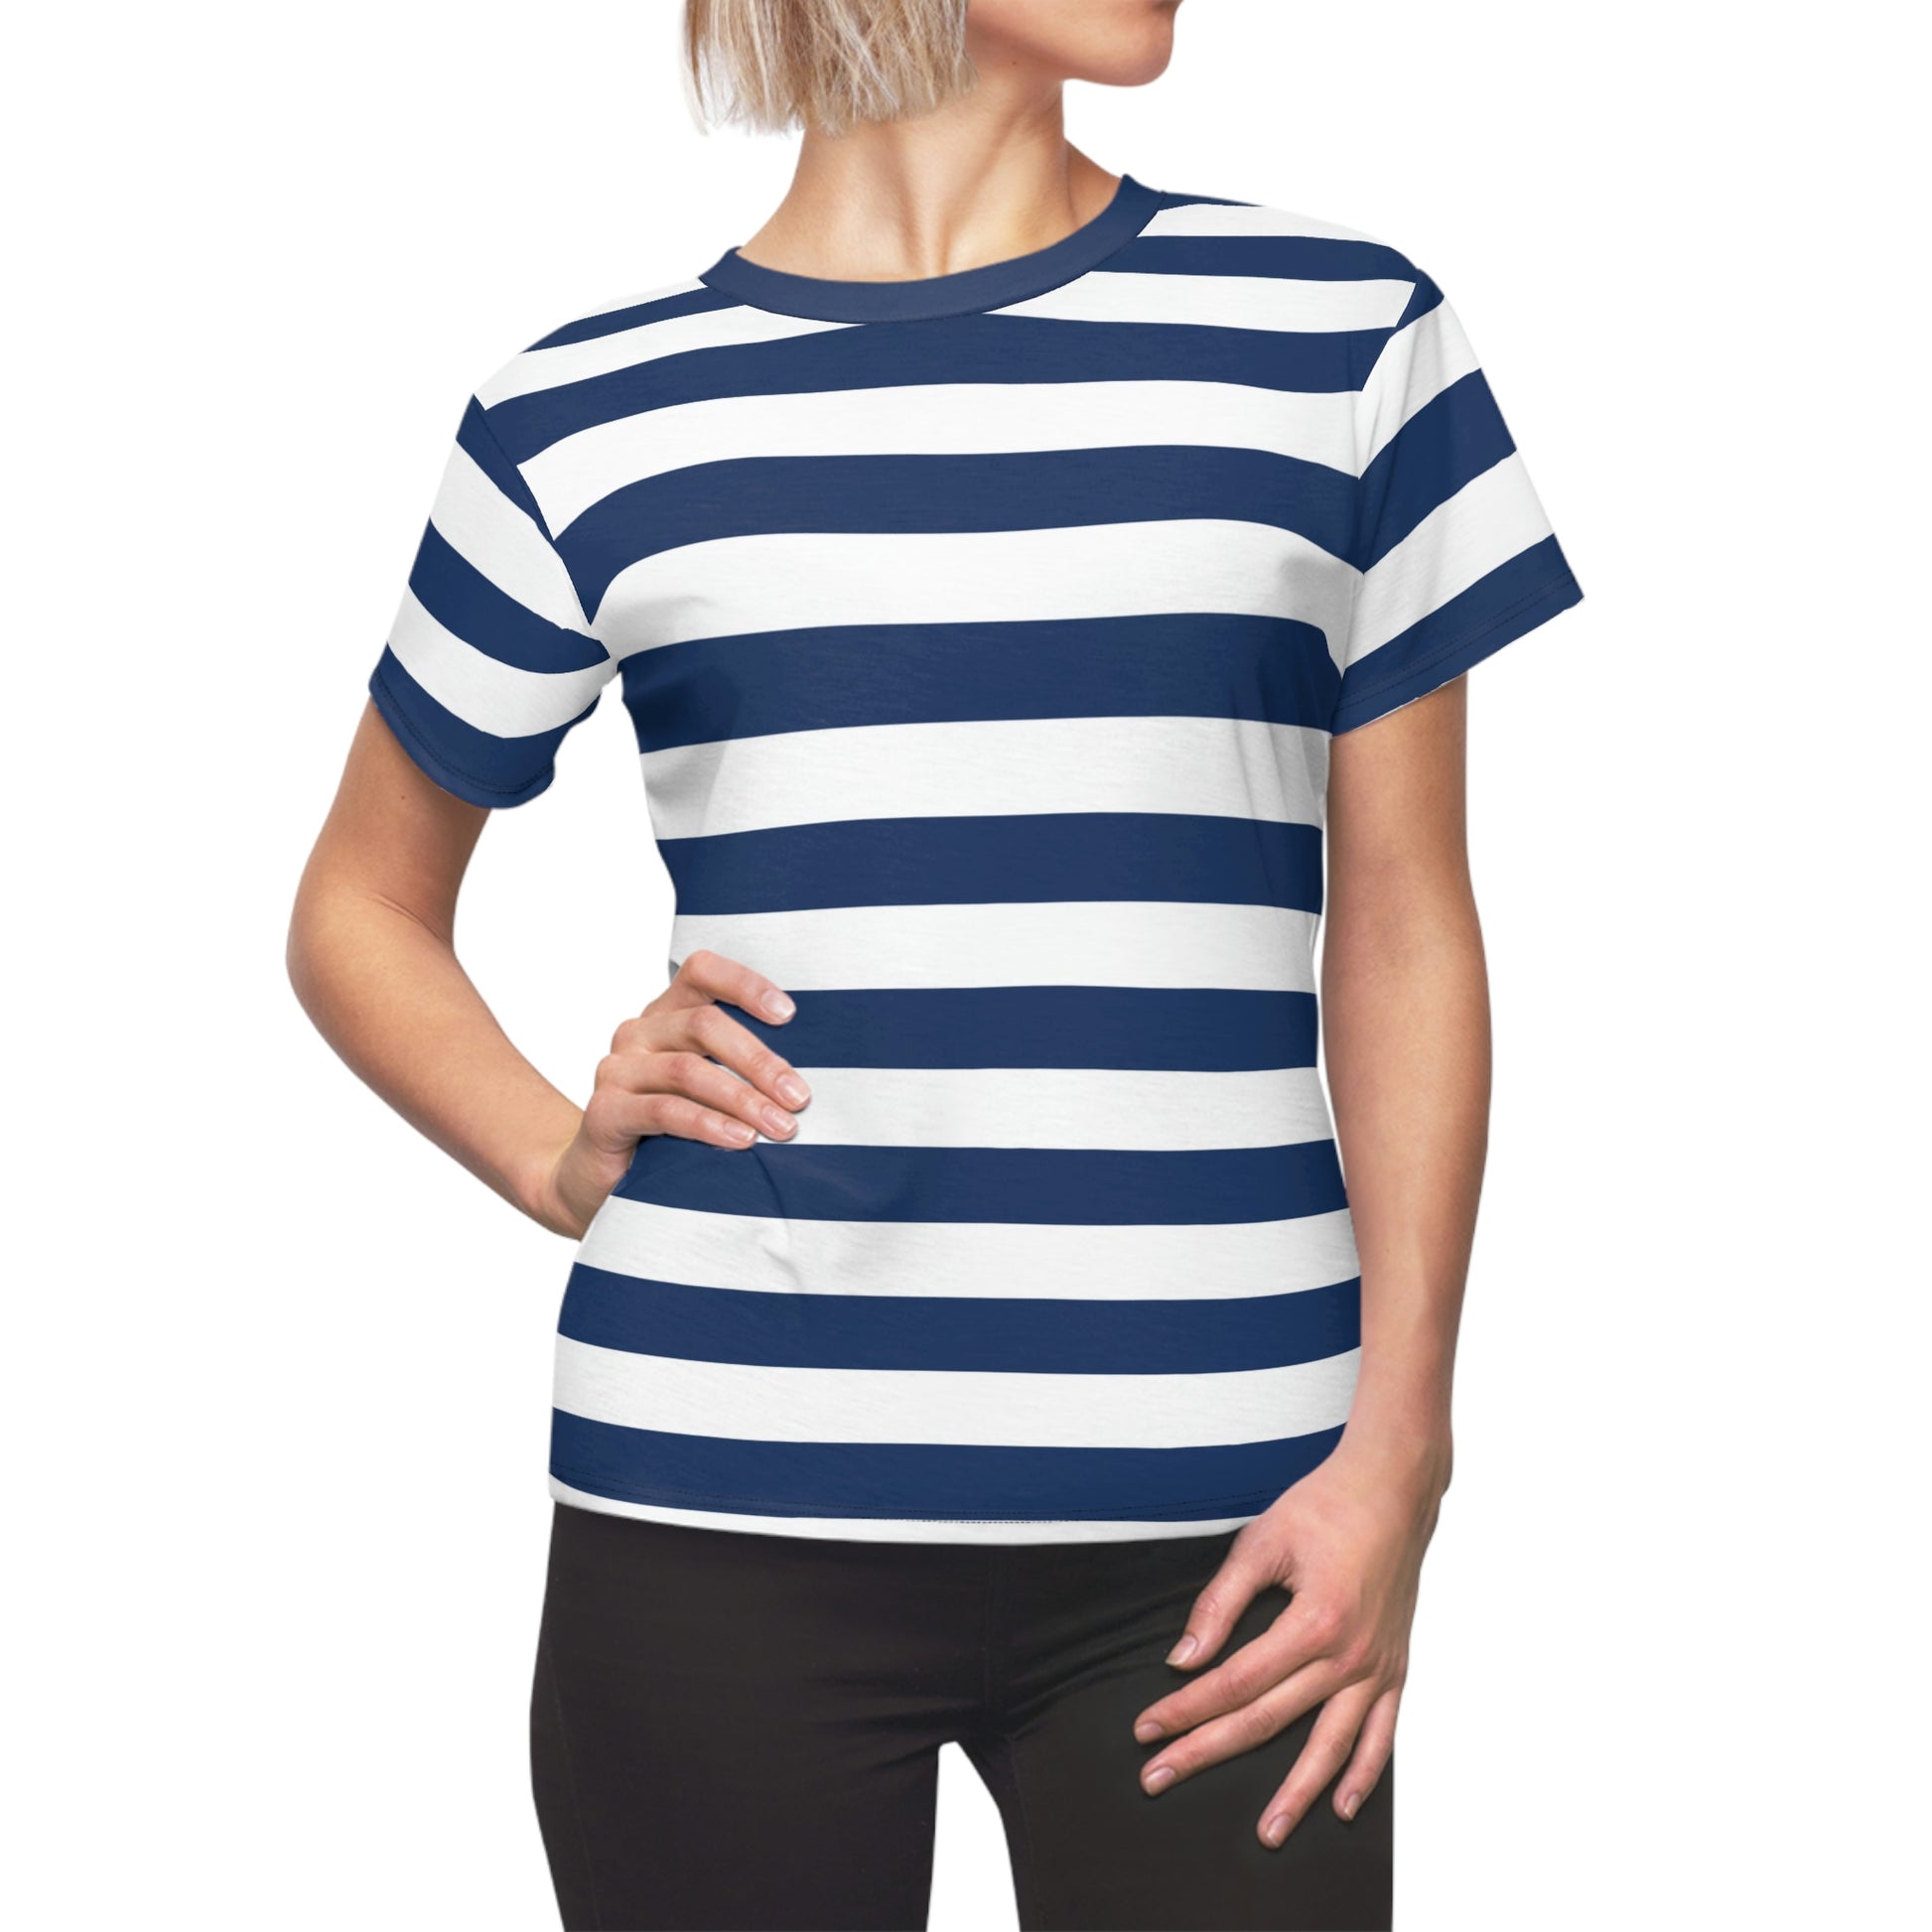 Blue and White Striped Women Tshirt, Vintage Designer Adult Graphic Aesthetic Fashion Fitted Crewneck Ladies Tee Shirt Top Starcove Fashion